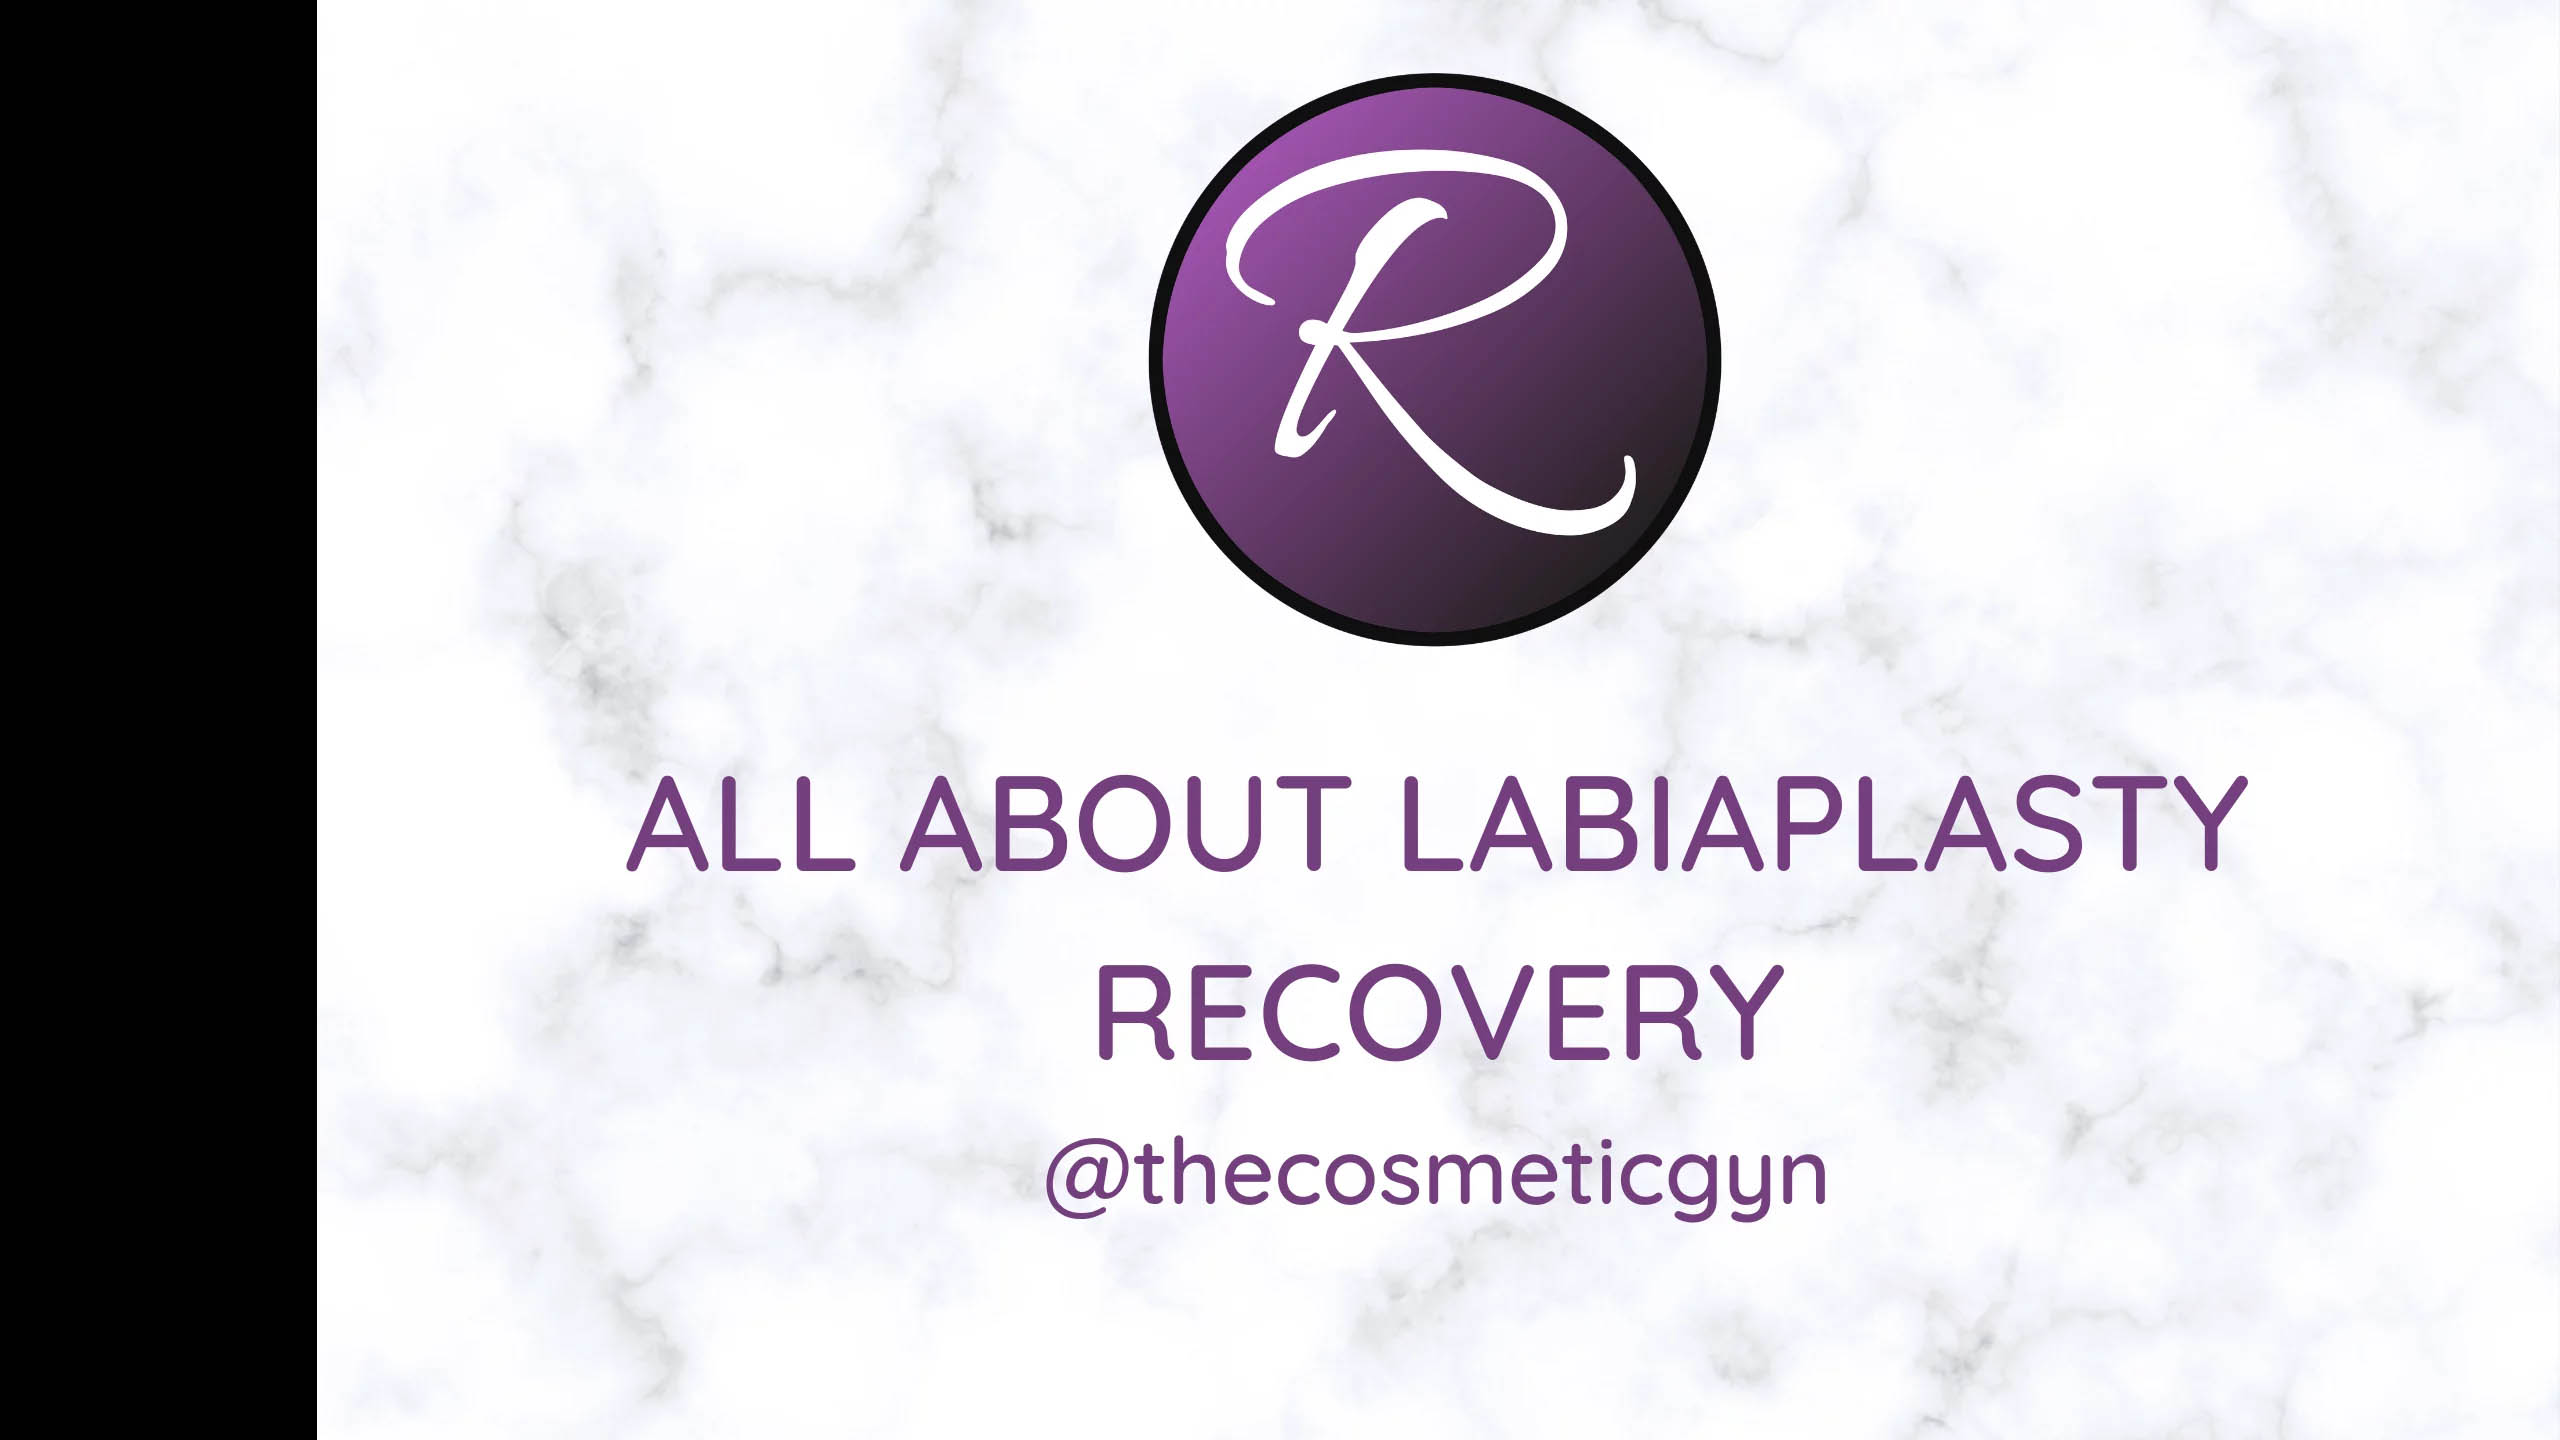 All About Labiaplasty Recovery